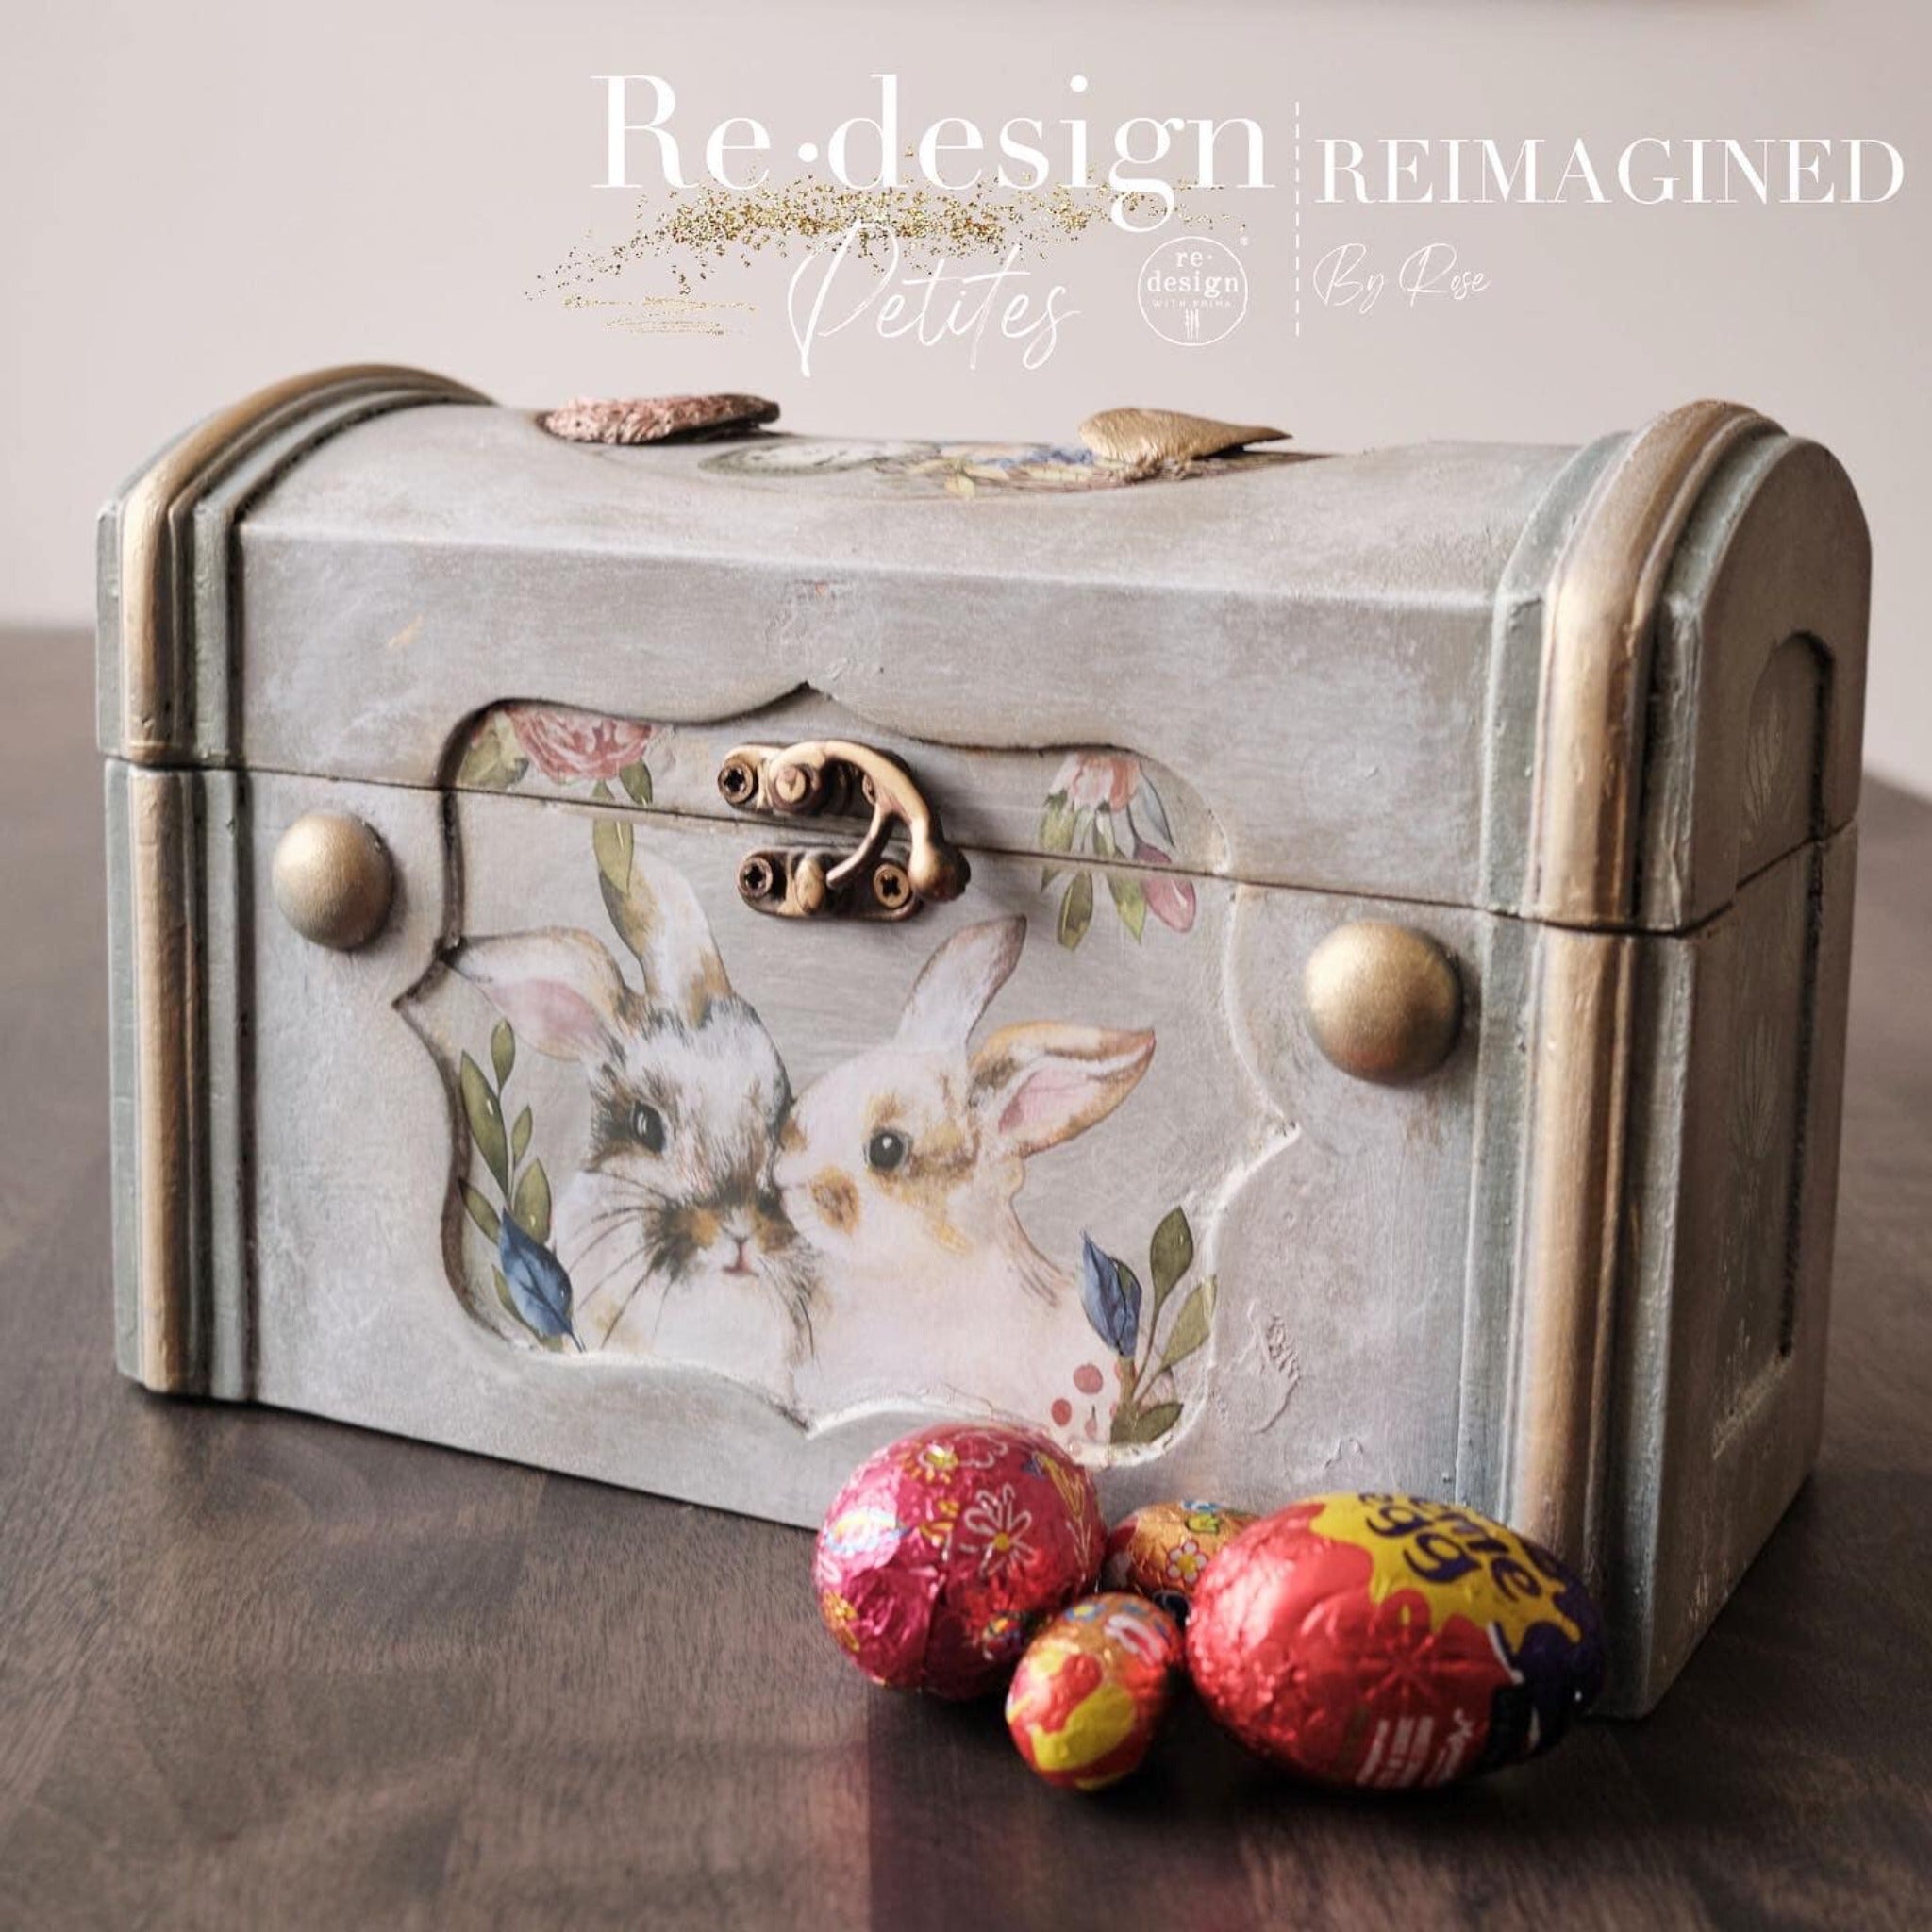 A vintage small wood box refurbished by Reimagined by Rose is painted light grey with gold accents and features ReDesign with Prima's Cottontail small transfer on its front inlay.